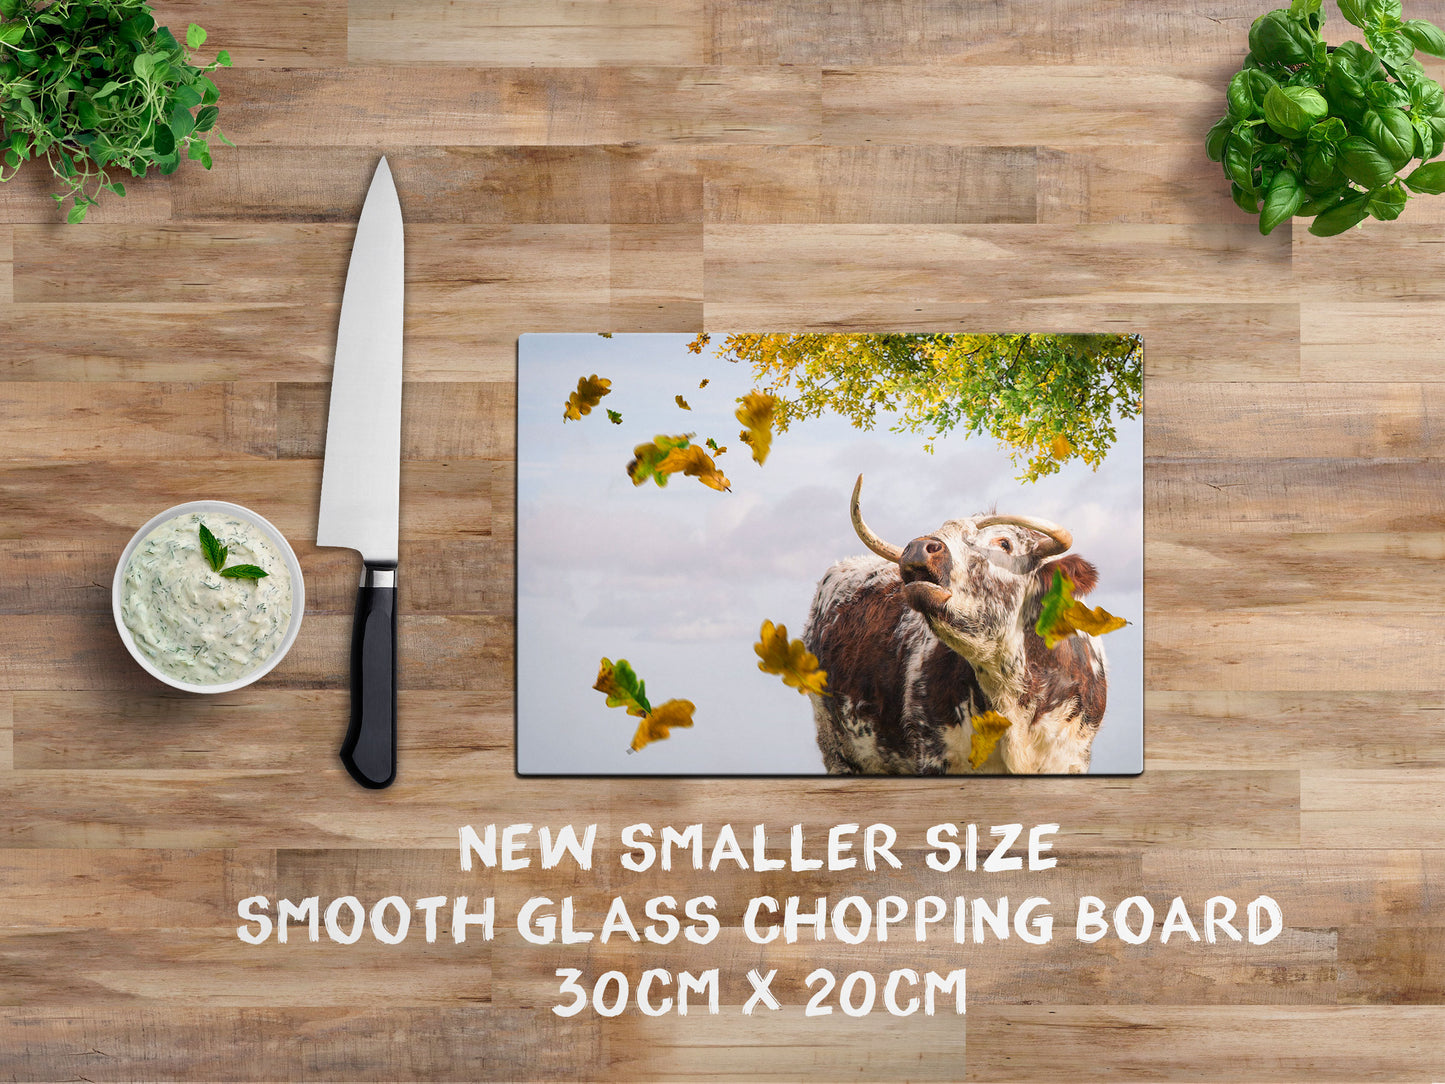 Longhorn Cow glass chopping board - Call of the Fall